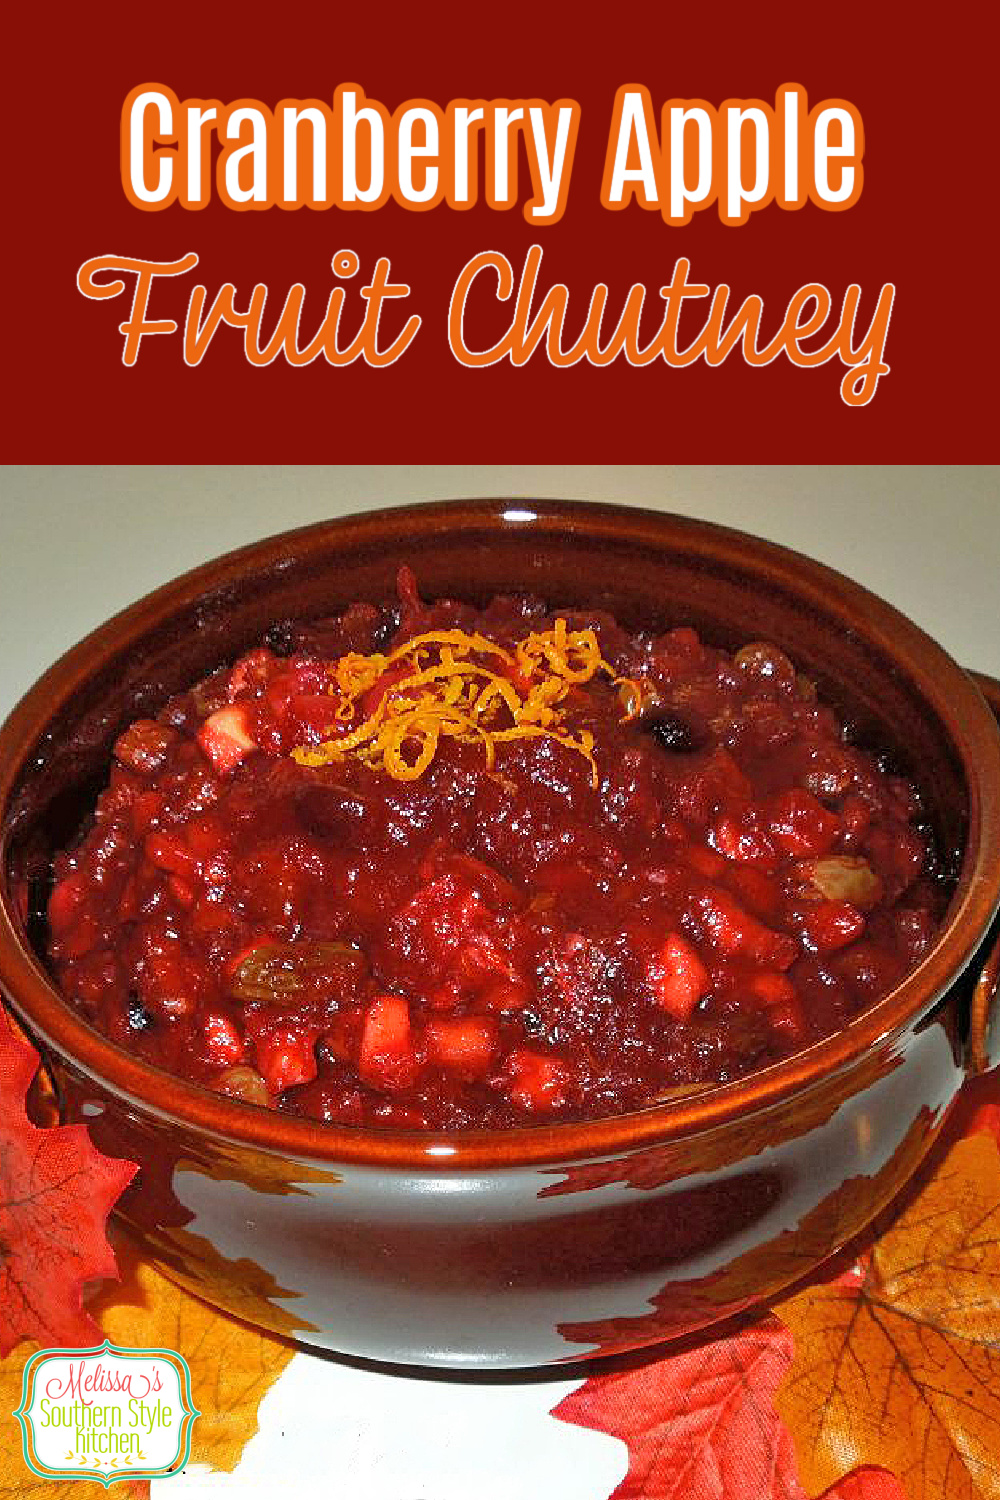 Enjoy this homemade chutney for the holidays, as a condiment for pork or chicken #cranberries #cranberrychutney #chutneys #fruitchutney #applechutney #thanksgiving #holidaysidedishes #christmasrecipes #southernfood #southernrecipes